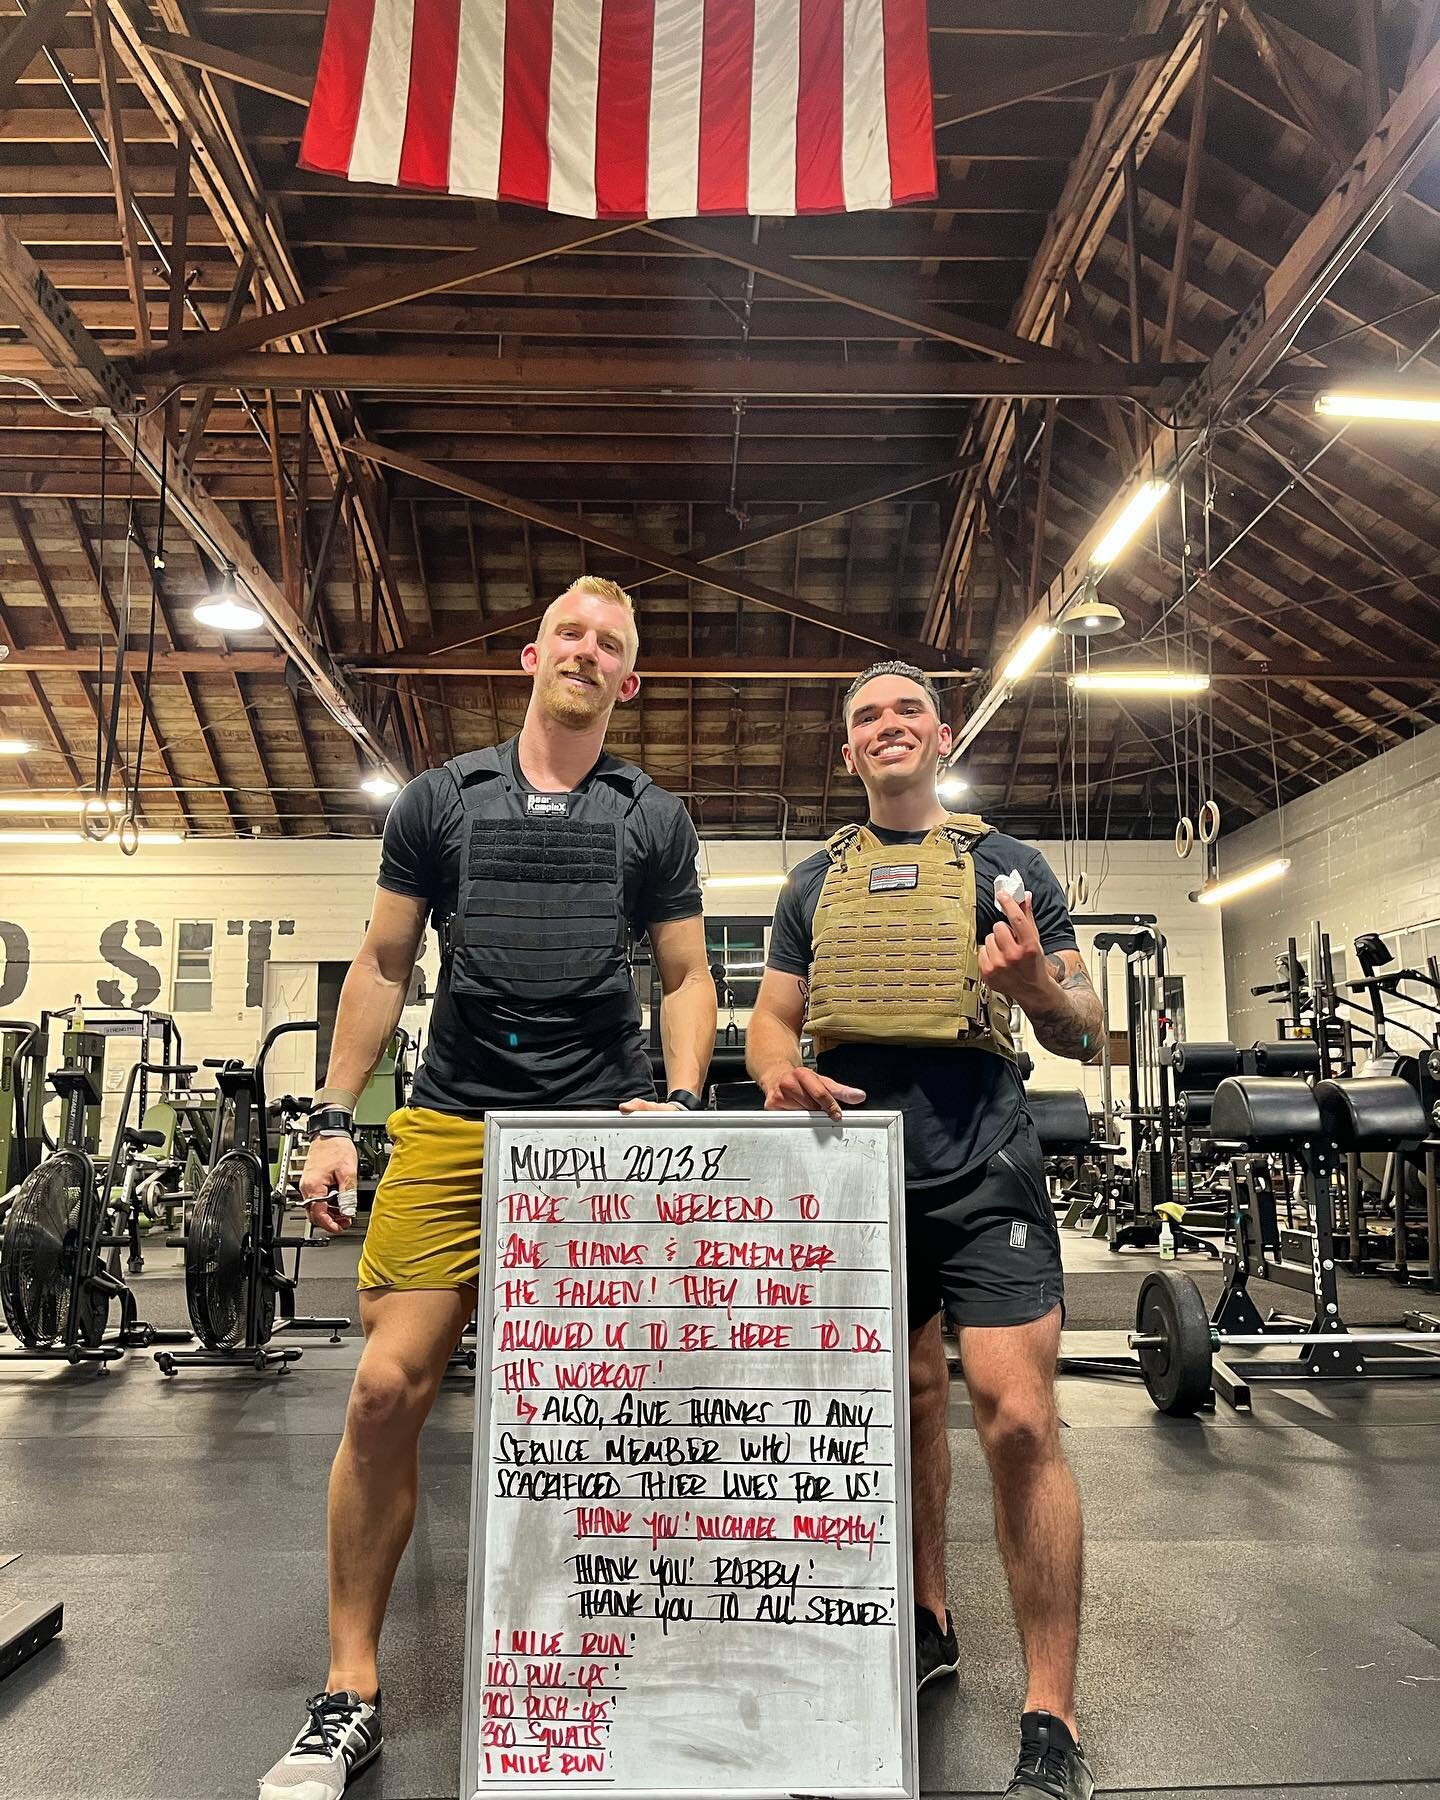 Leave no man behind. 

I was closing up shop Friday night and learned Daniel here (absolute savage), was about to do Murph solo. Read this message he wrote and that was that. Time to get after it. It&rsquo;s not about how long it takes to complete- I